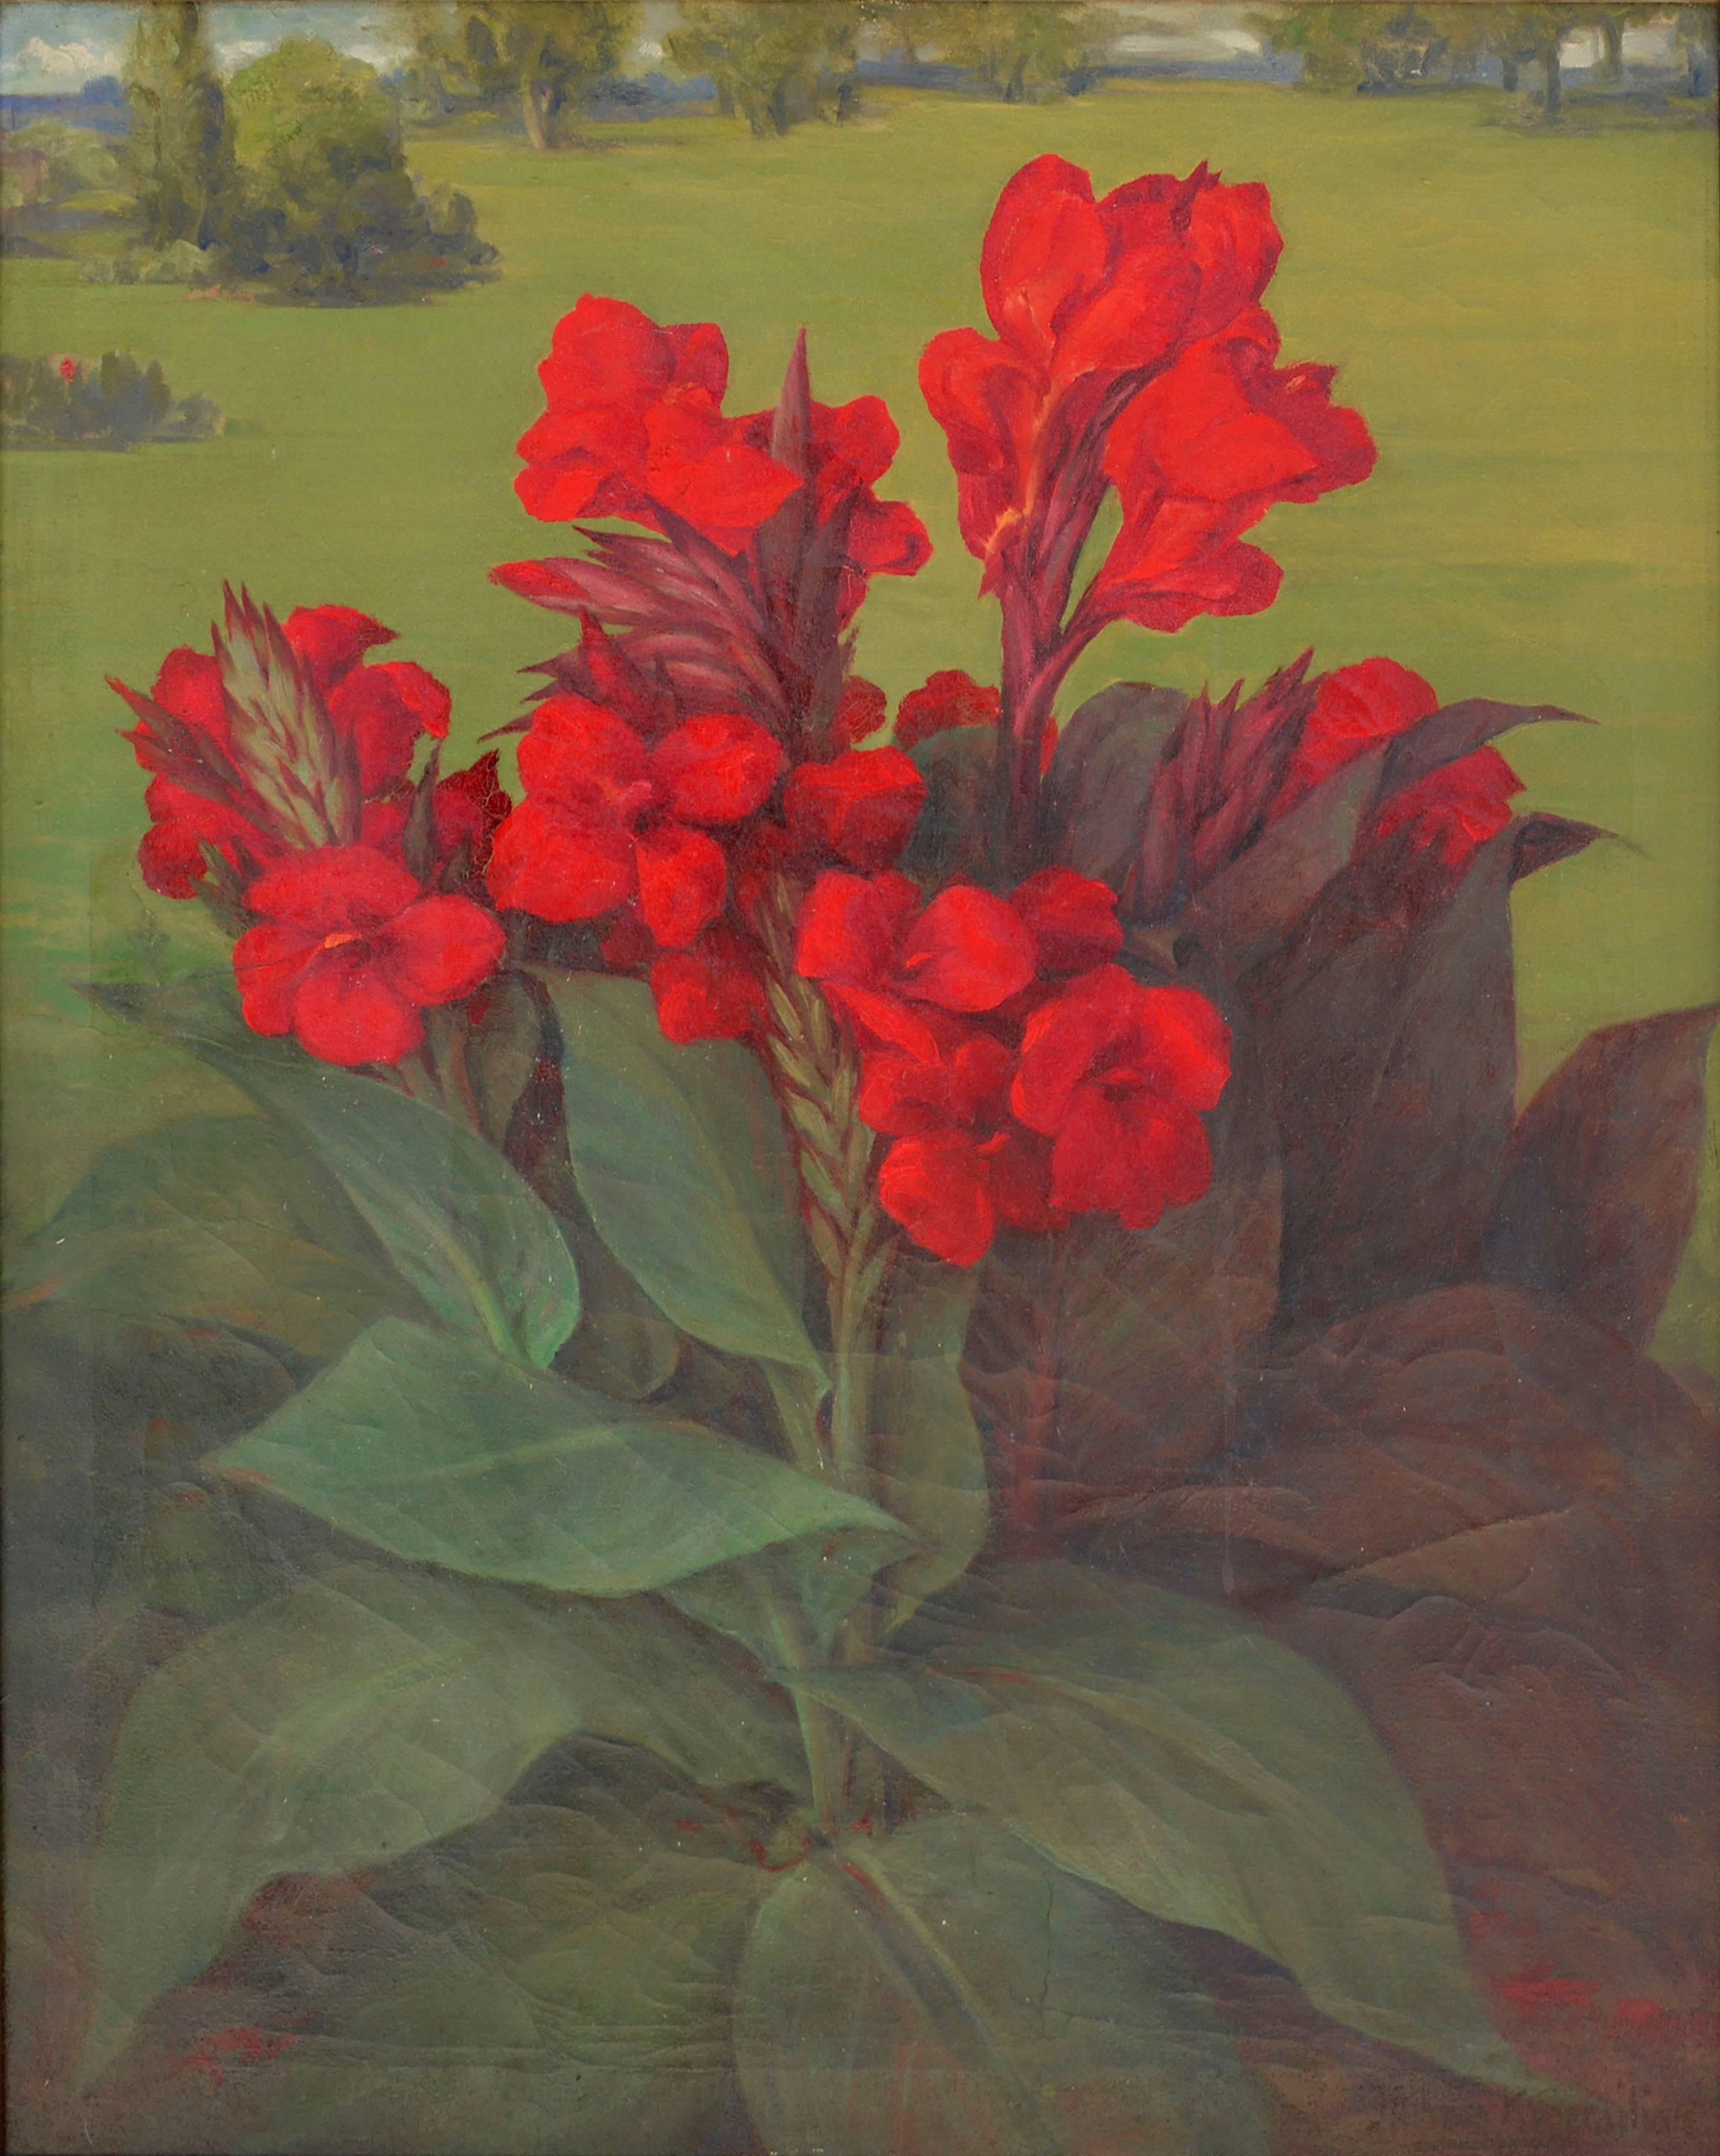 Mid Century Garden Landscape with Red Canna Lilies  - Painting by Mihran K. Serailian